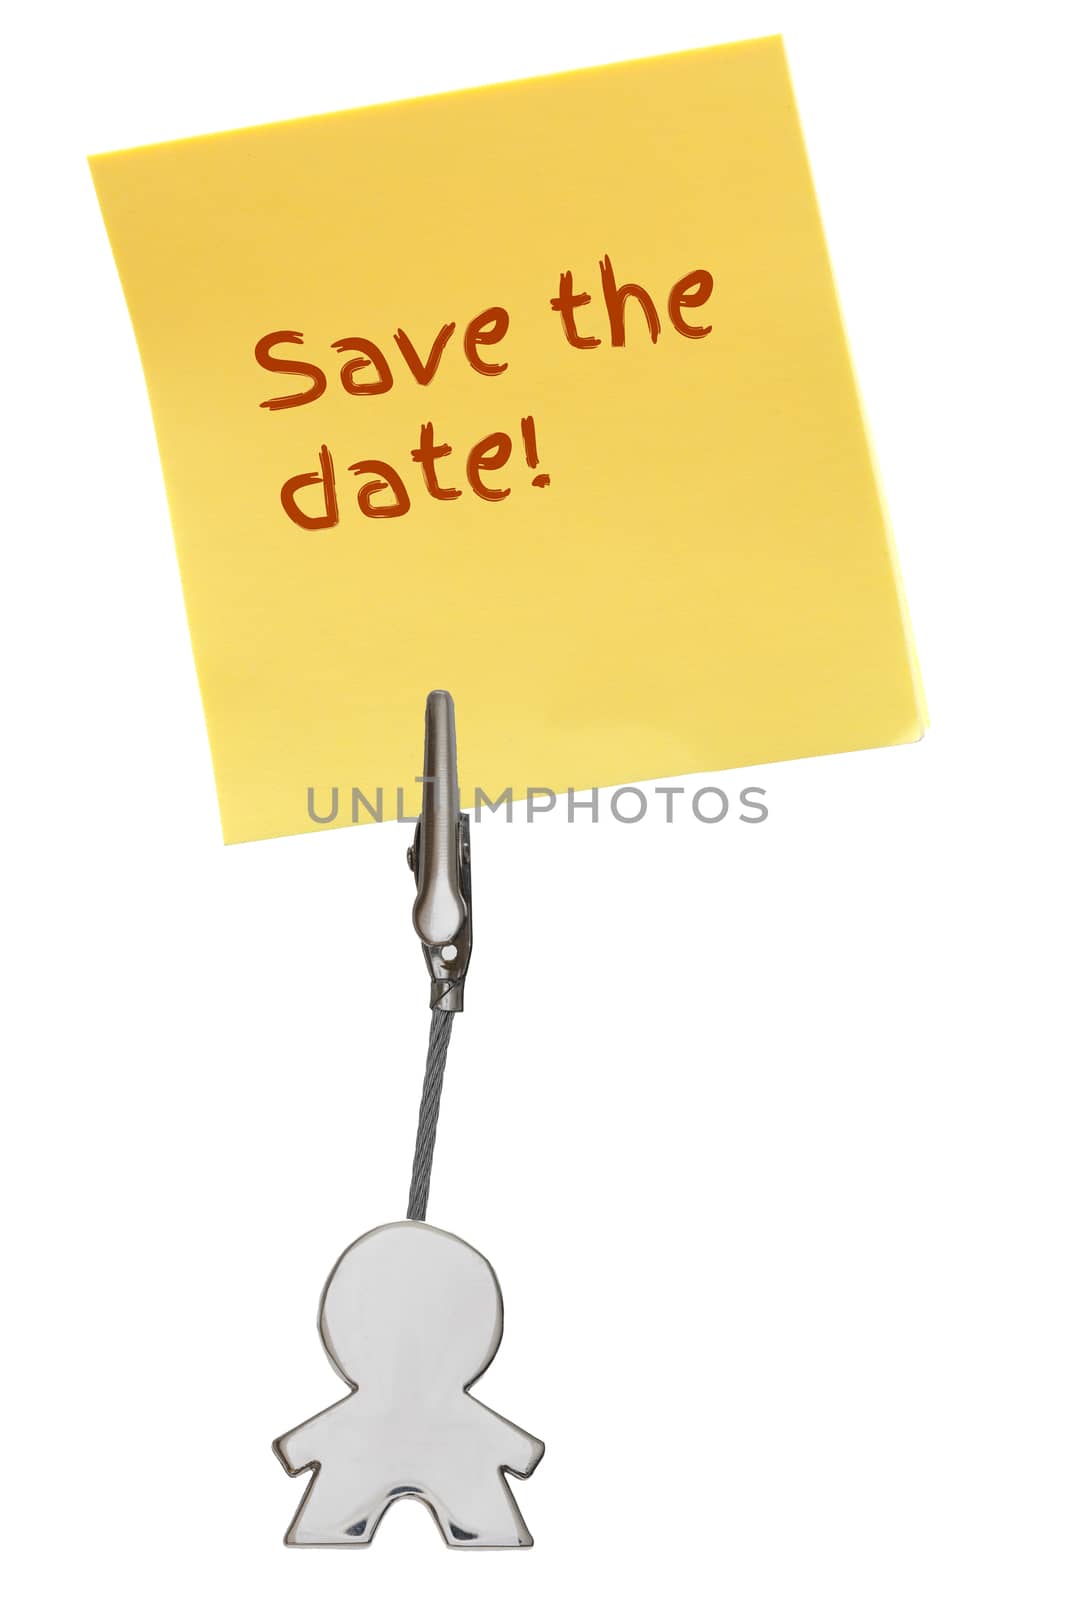 Man Figure Business Card Holder with clip holding a yellow paper note SAVE THE DATE; isolated on white background, customizable